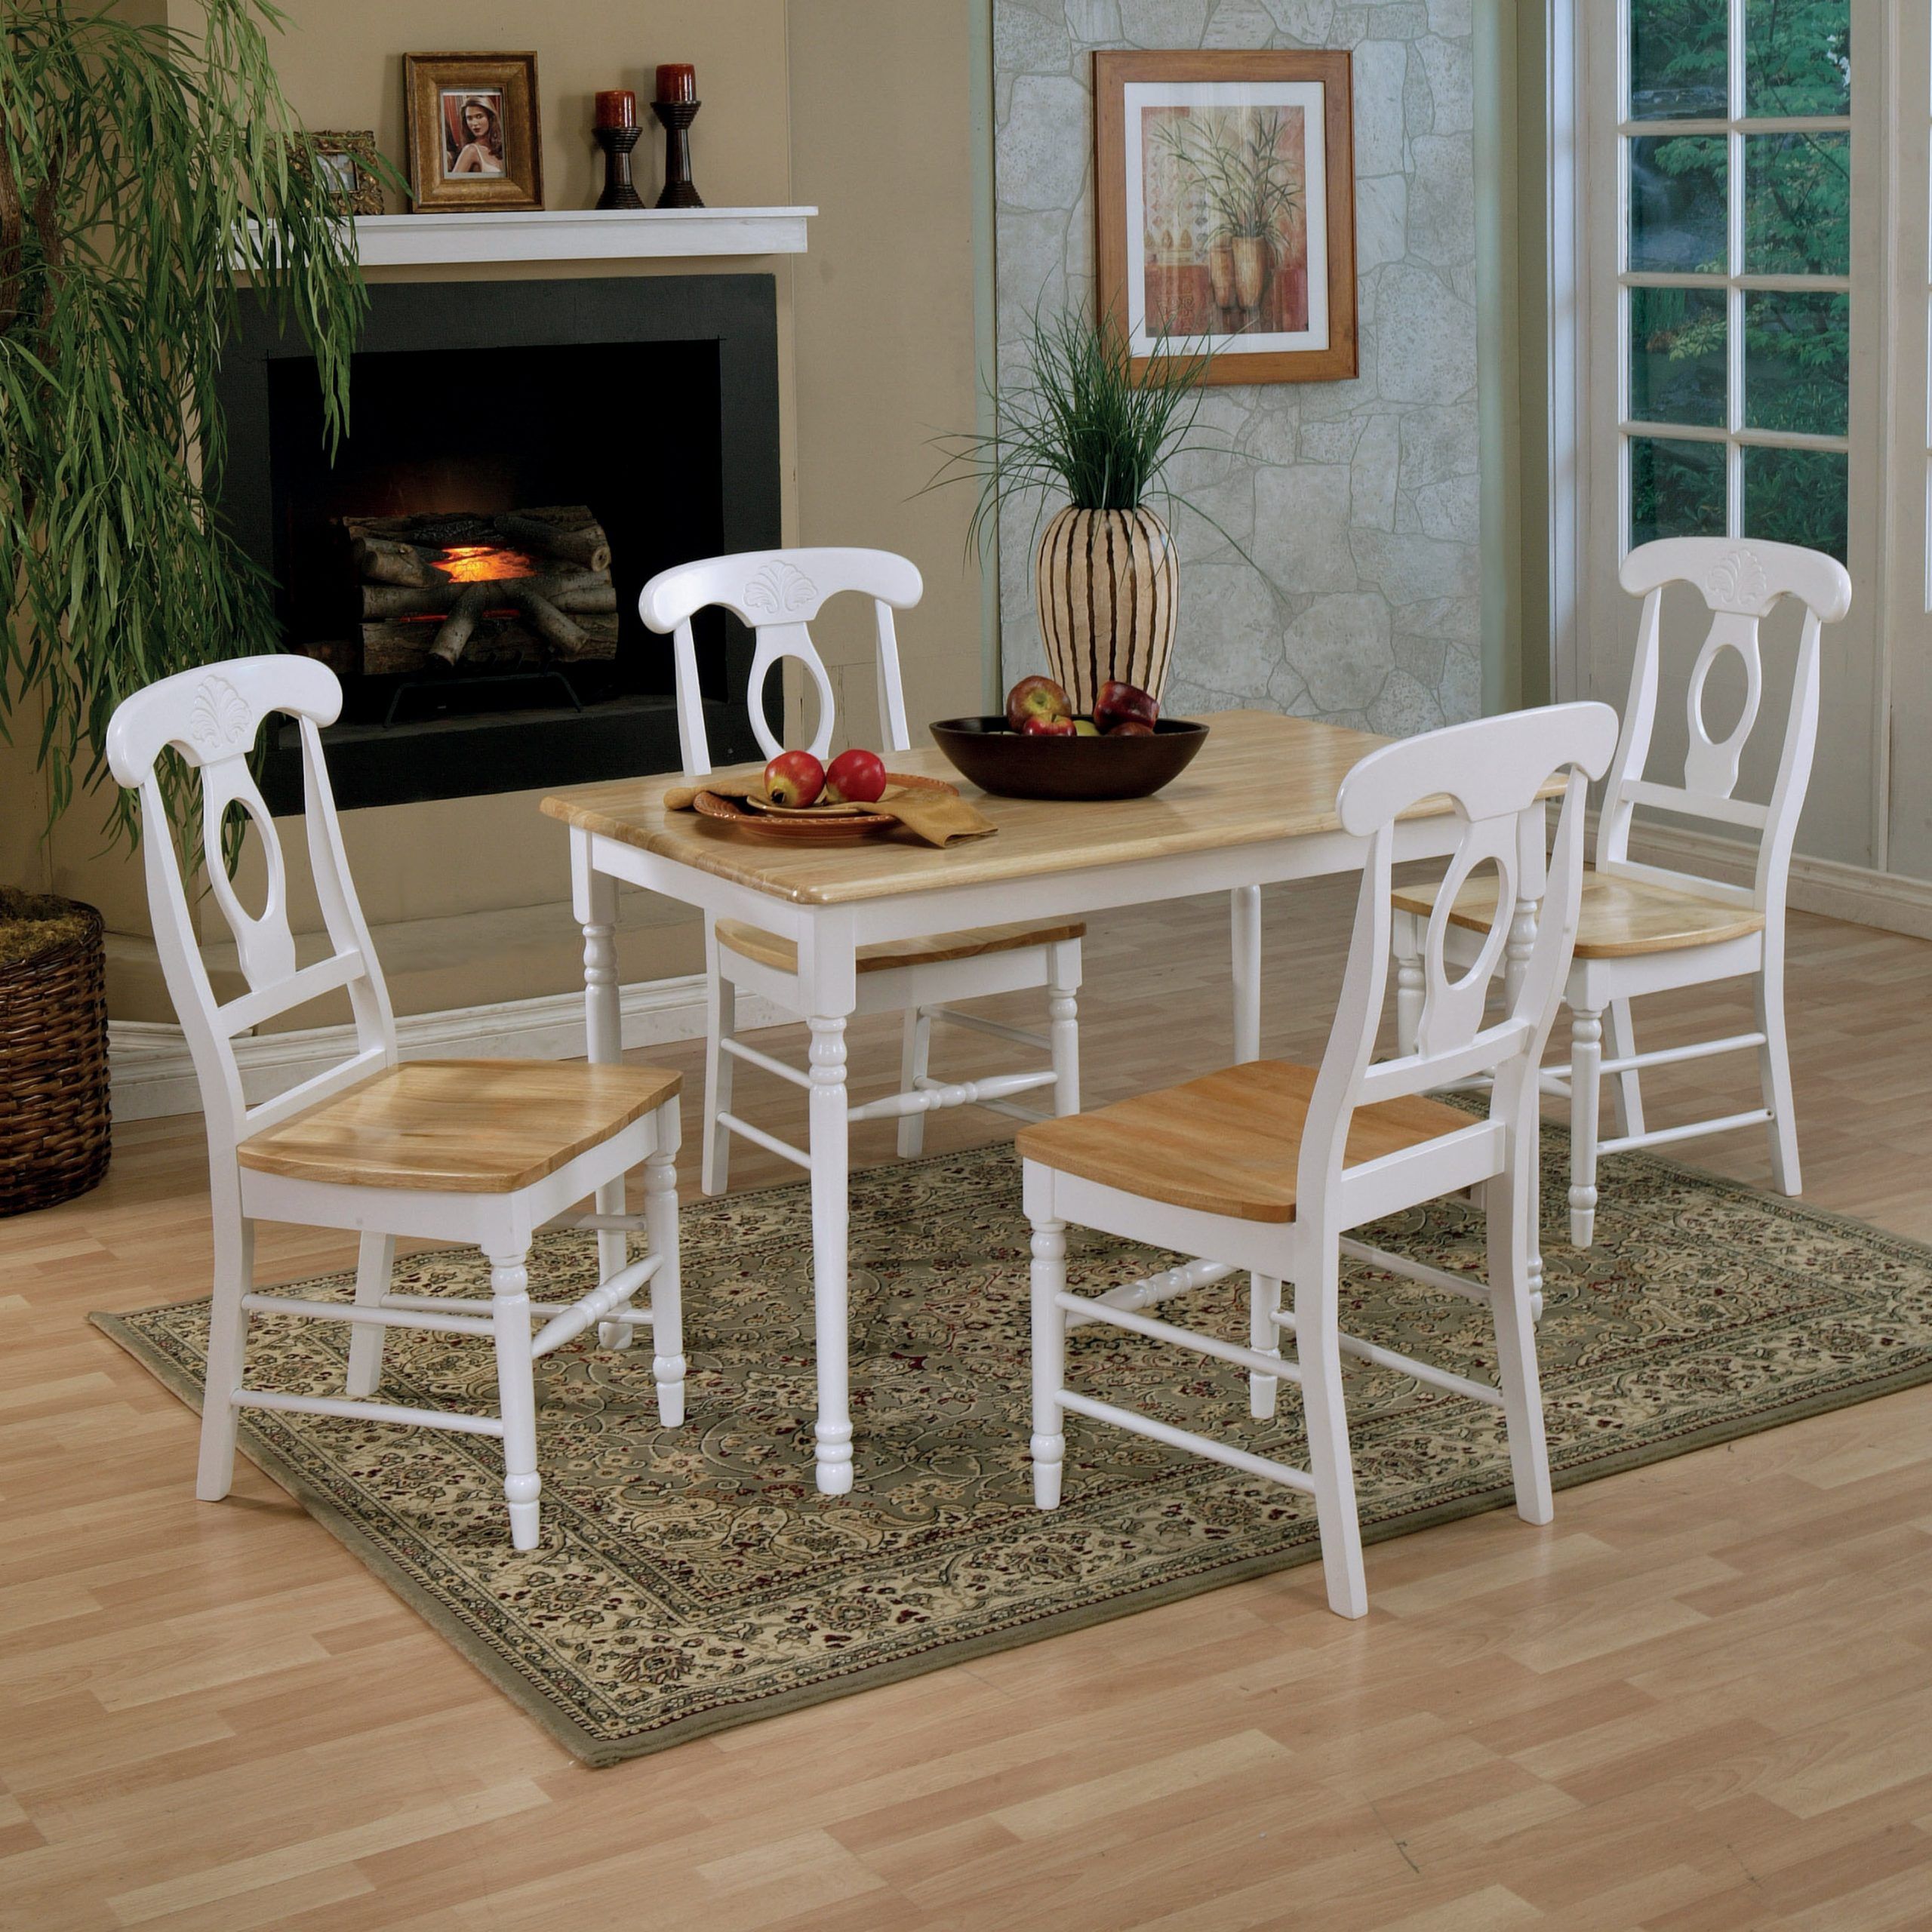 White Rectangular Dining Tables Intended For Trendy Rectangle Dining Table Natural Brown And White – Coaster Fin (View 17 of 20)